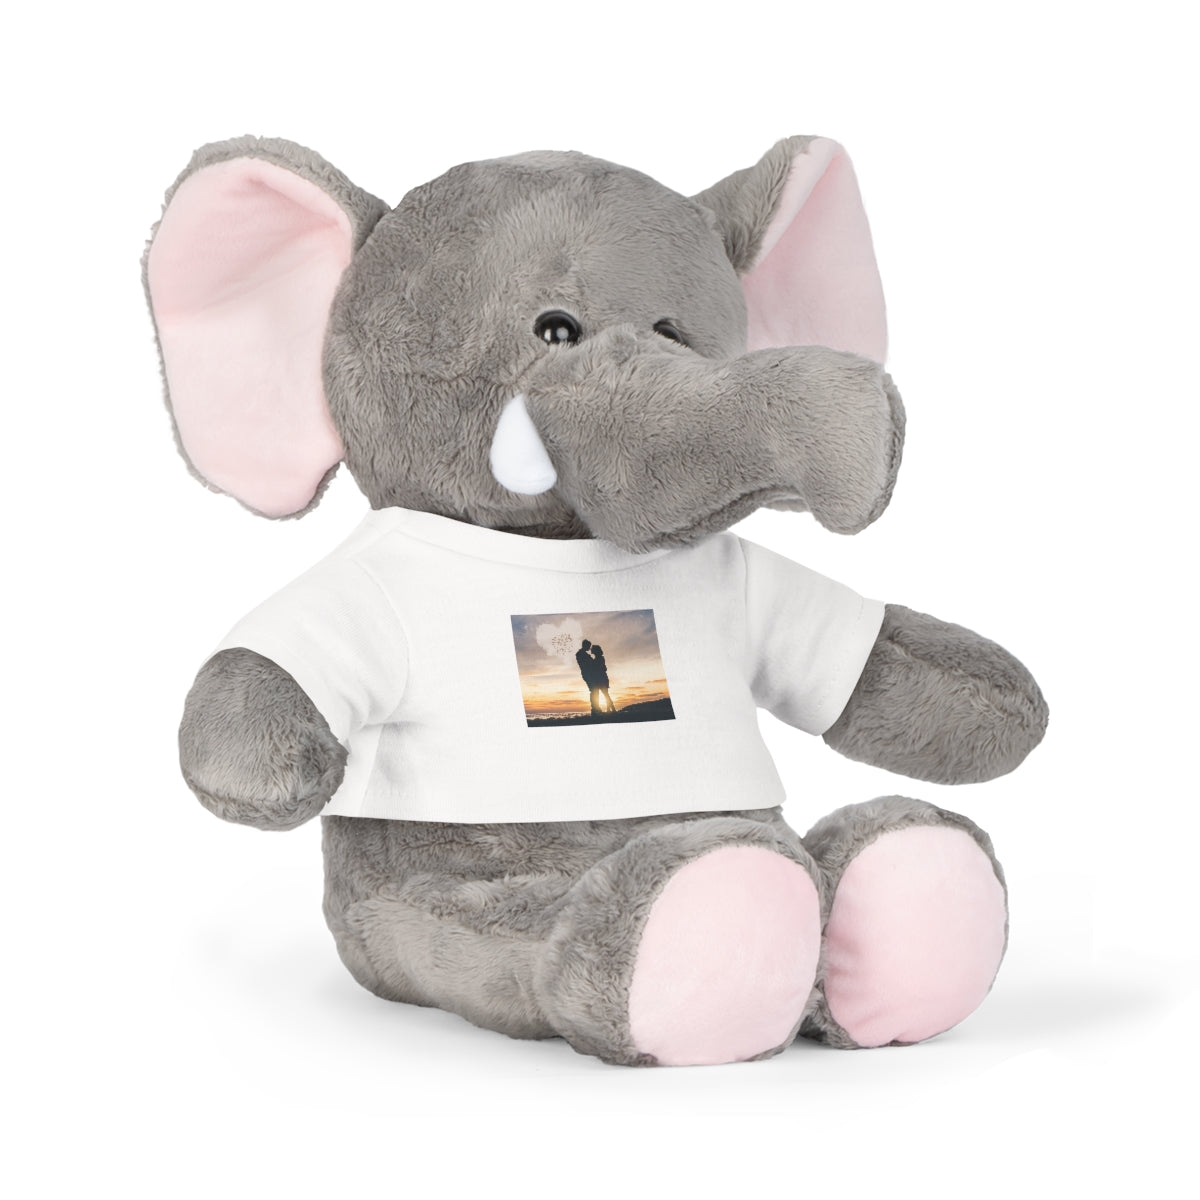 Cuddly toy with photo